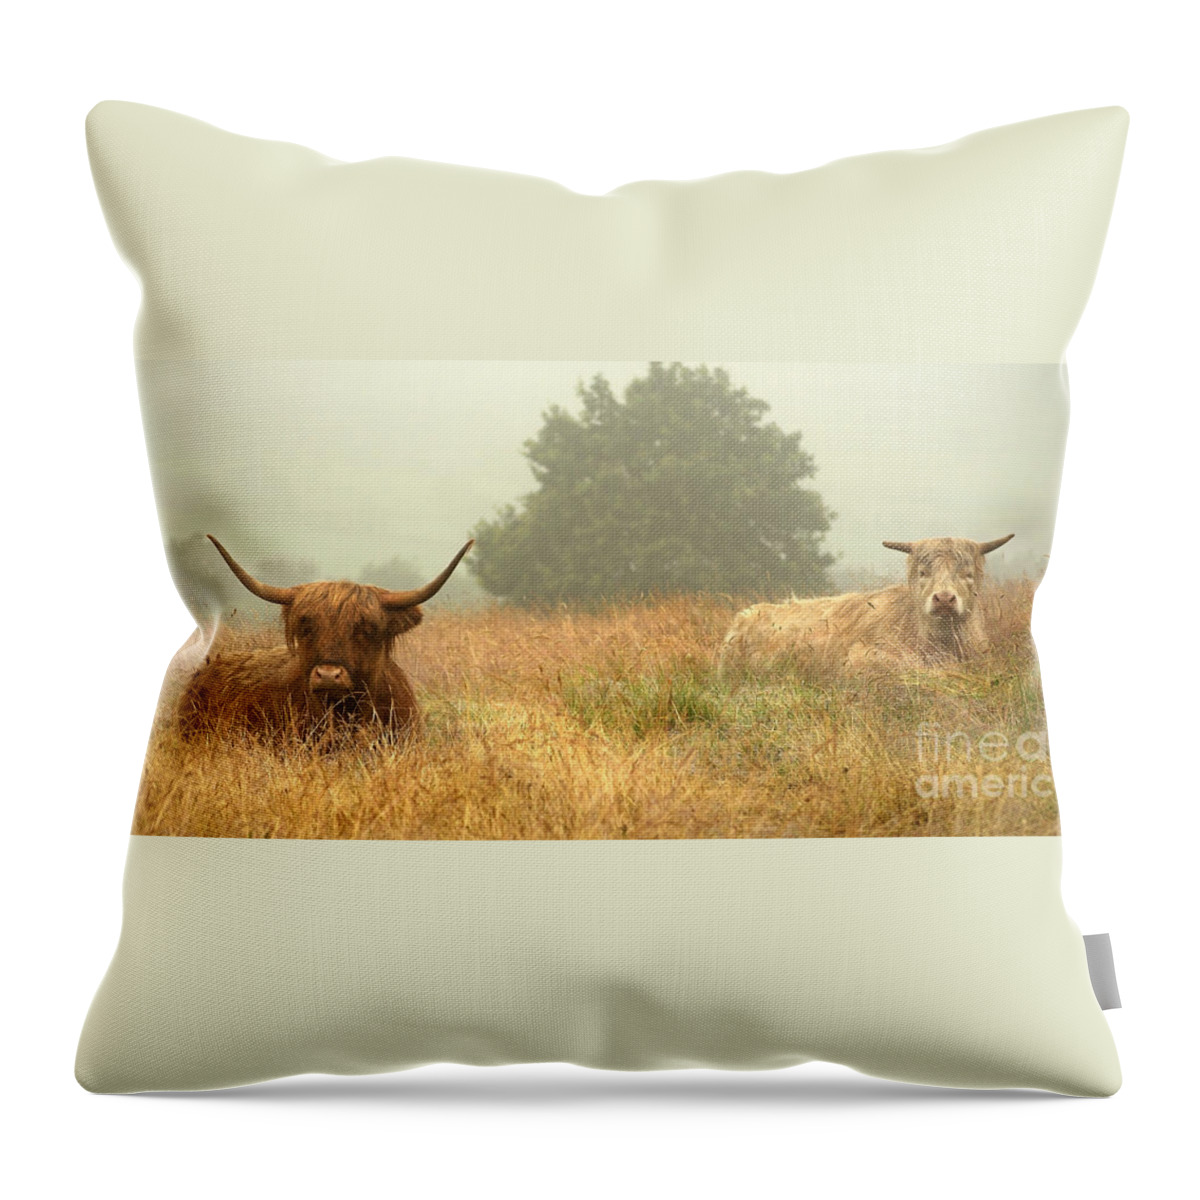 Cows Throw Pillow featuring the photograph Heelans In The Mist by Linsey Williams